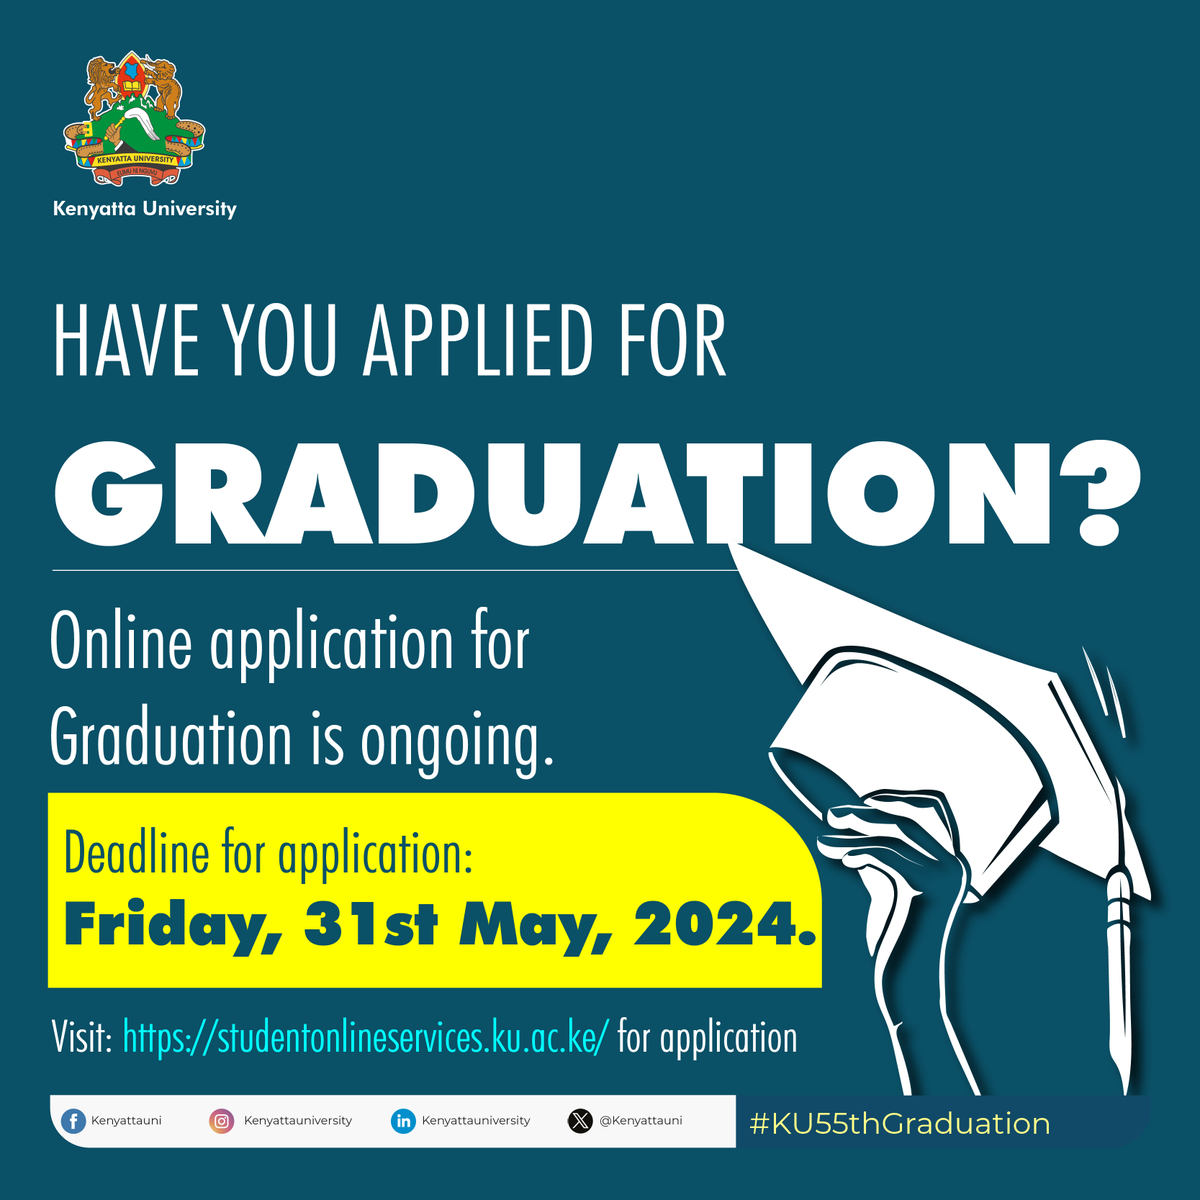 July Graduation application is still ongoing. The deadline is fast approaching. Apply online here: studentonlineservices.ku.ac.ke